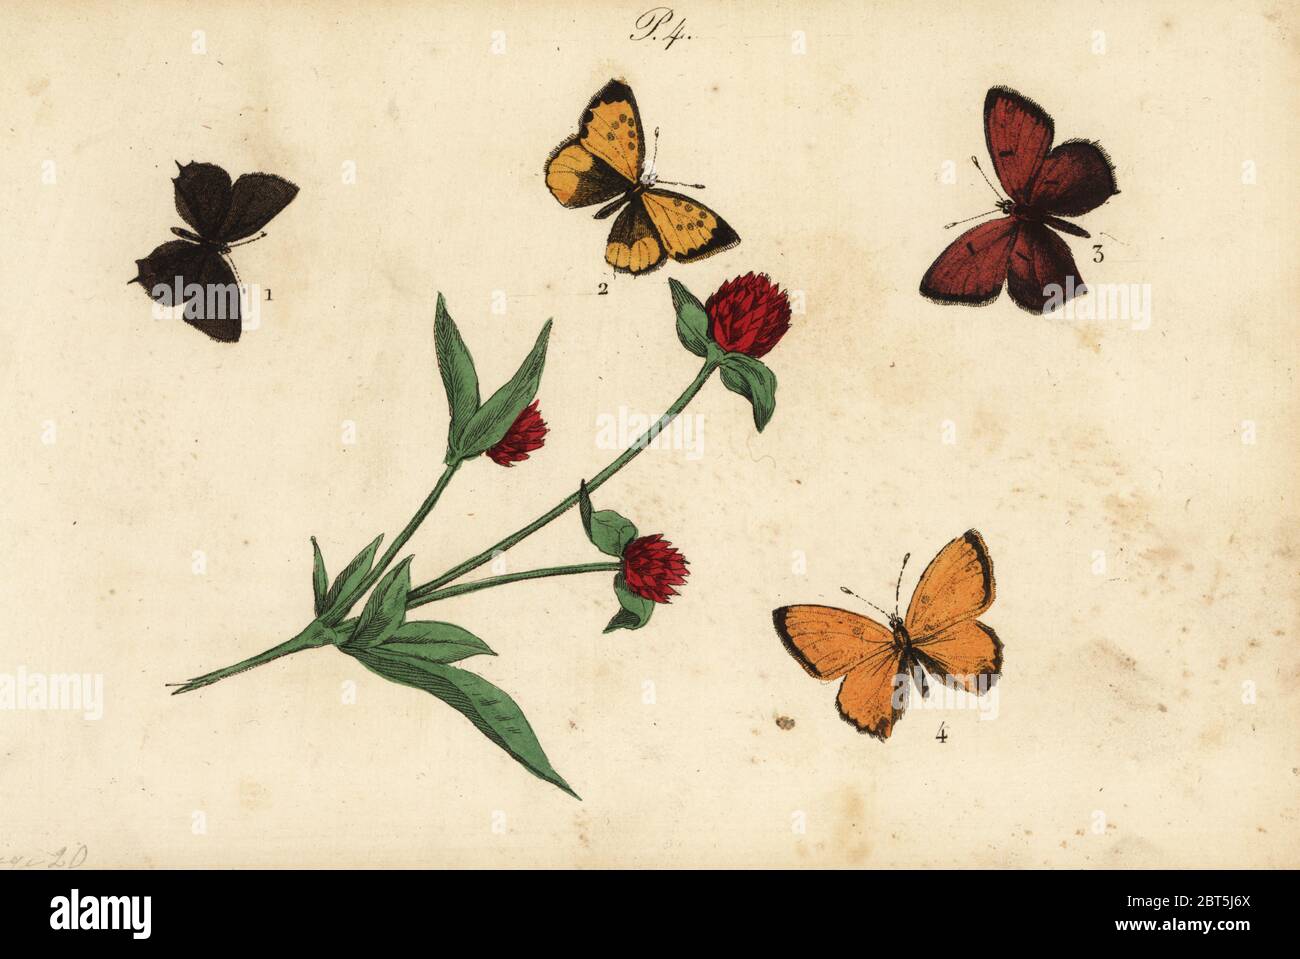 Common acacia blue, Polyommatus icarus 1, Provence hairstreak, Tomares ballus 2, purple-edged copper, Lycaena hippothoe 3 and scarce copper, Lycaena virgaureae 4. Handcoloured lithograph from Musee du Naturaliste dedie a la Jeunesse, Histoire des Papillons, Hippolyte and Polydor Pauquet, Paris, 1833. Stock Photo